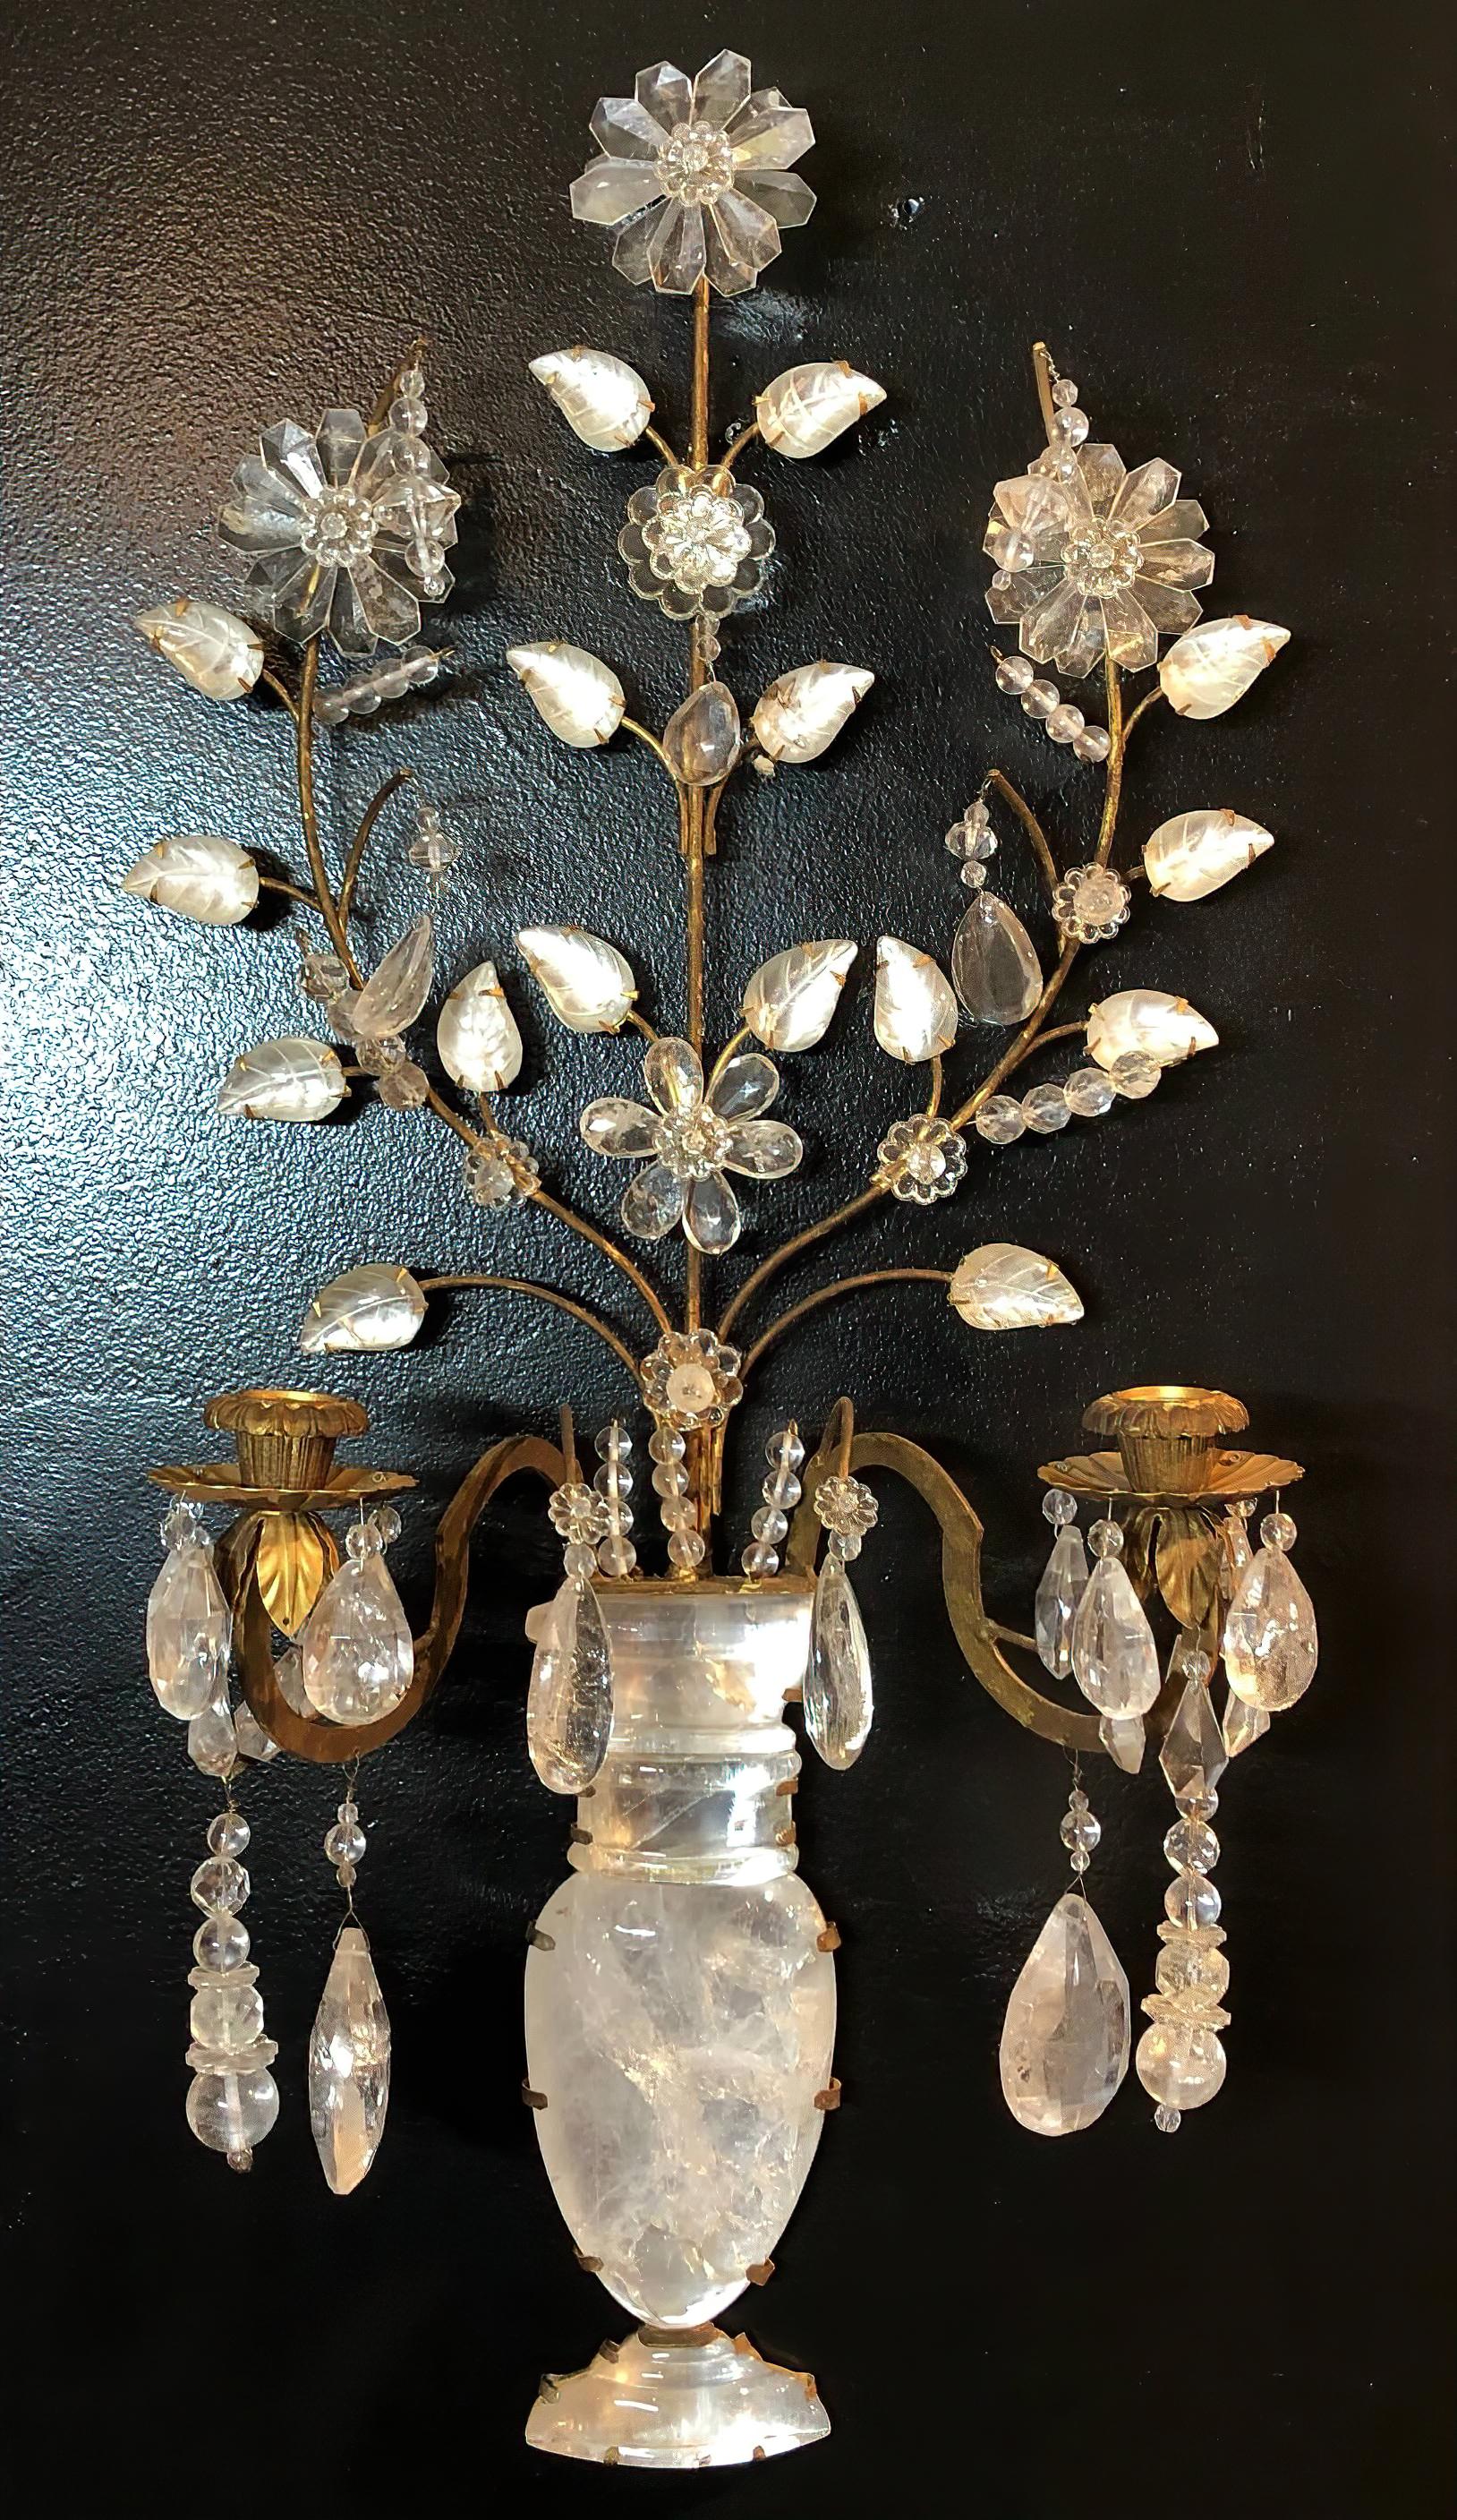 Pair of neoclassic two light rock crystal wall light sconces with brass and rock crystal flower petals, a long flower urn form back with brass frame and cups. In the Bagues manner.